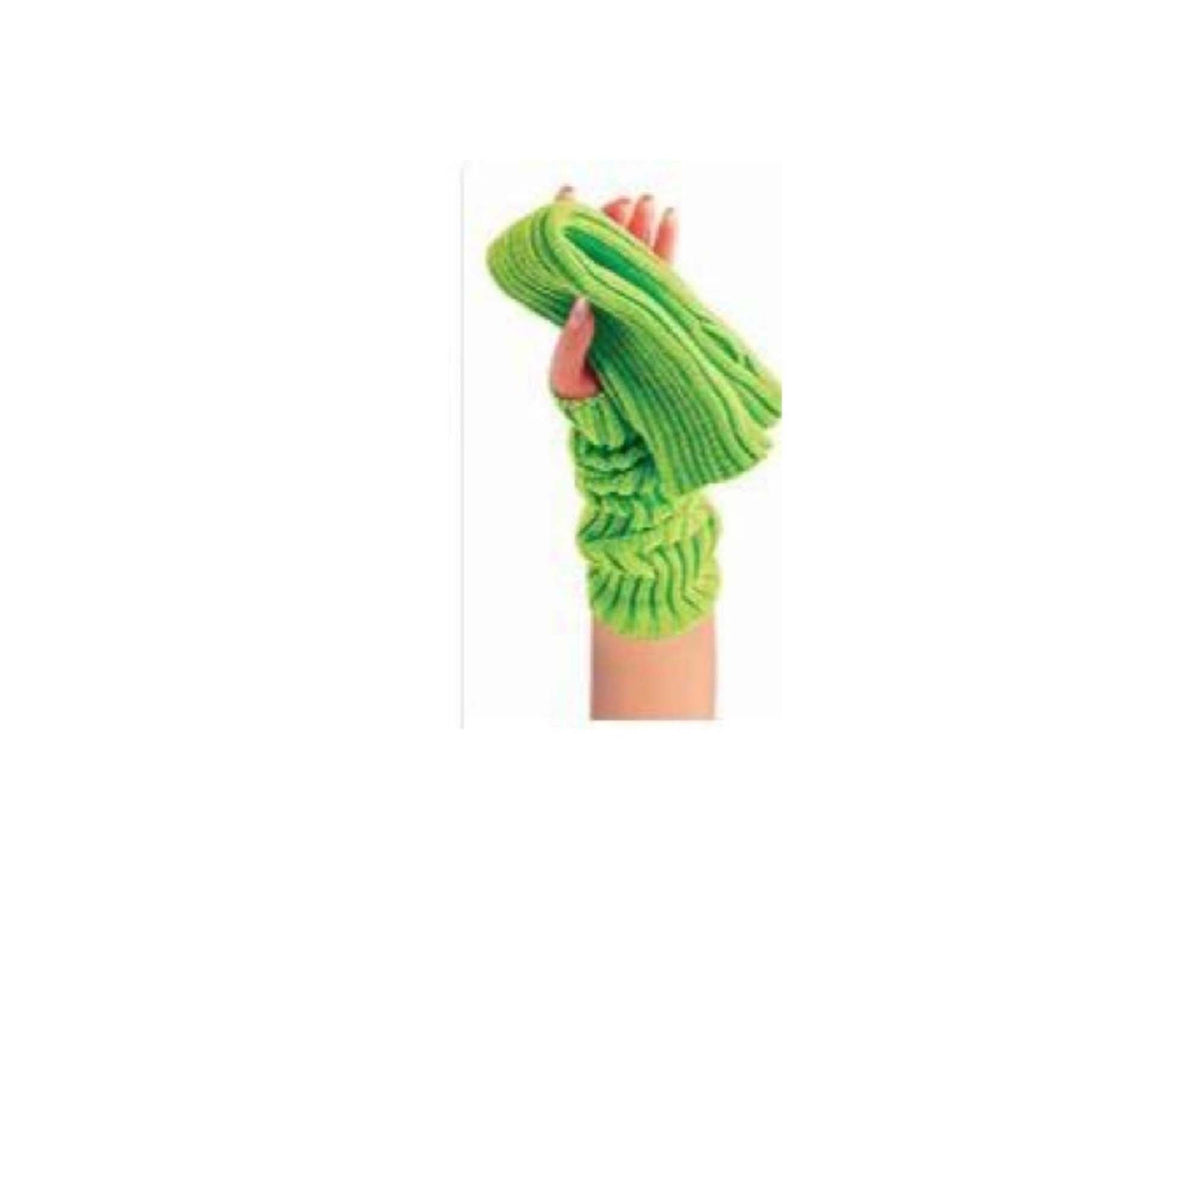 H M NOUVEAUTE LTEE Costume Accessories 80s Neon Green Wrist Warmers for Adults, 1 Count 712347218